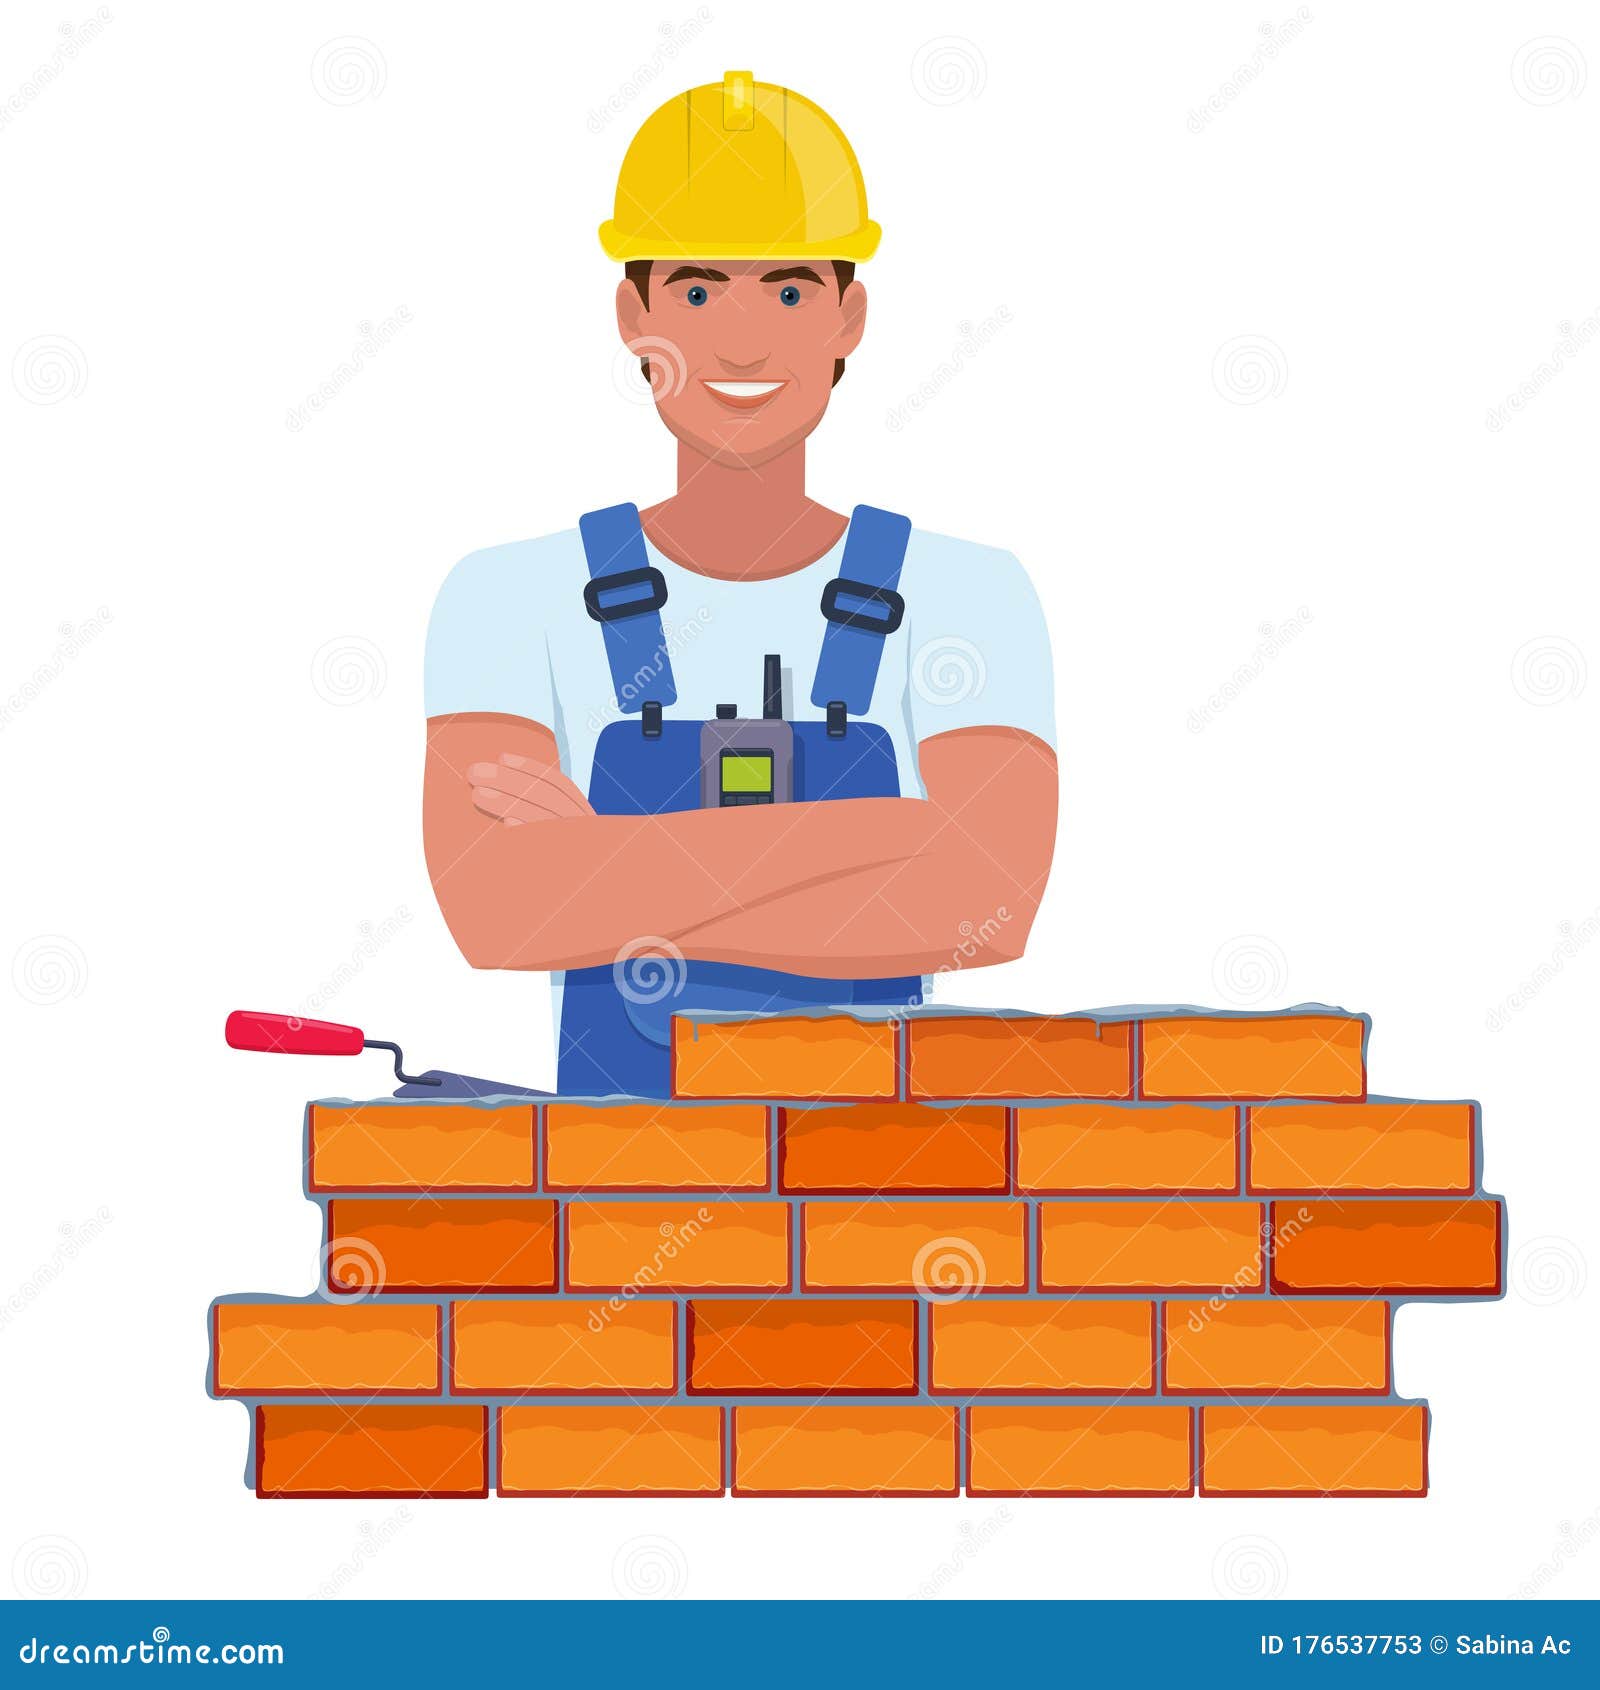 Illustration of Professional Builder with Arms Crossed Stock Vector ...